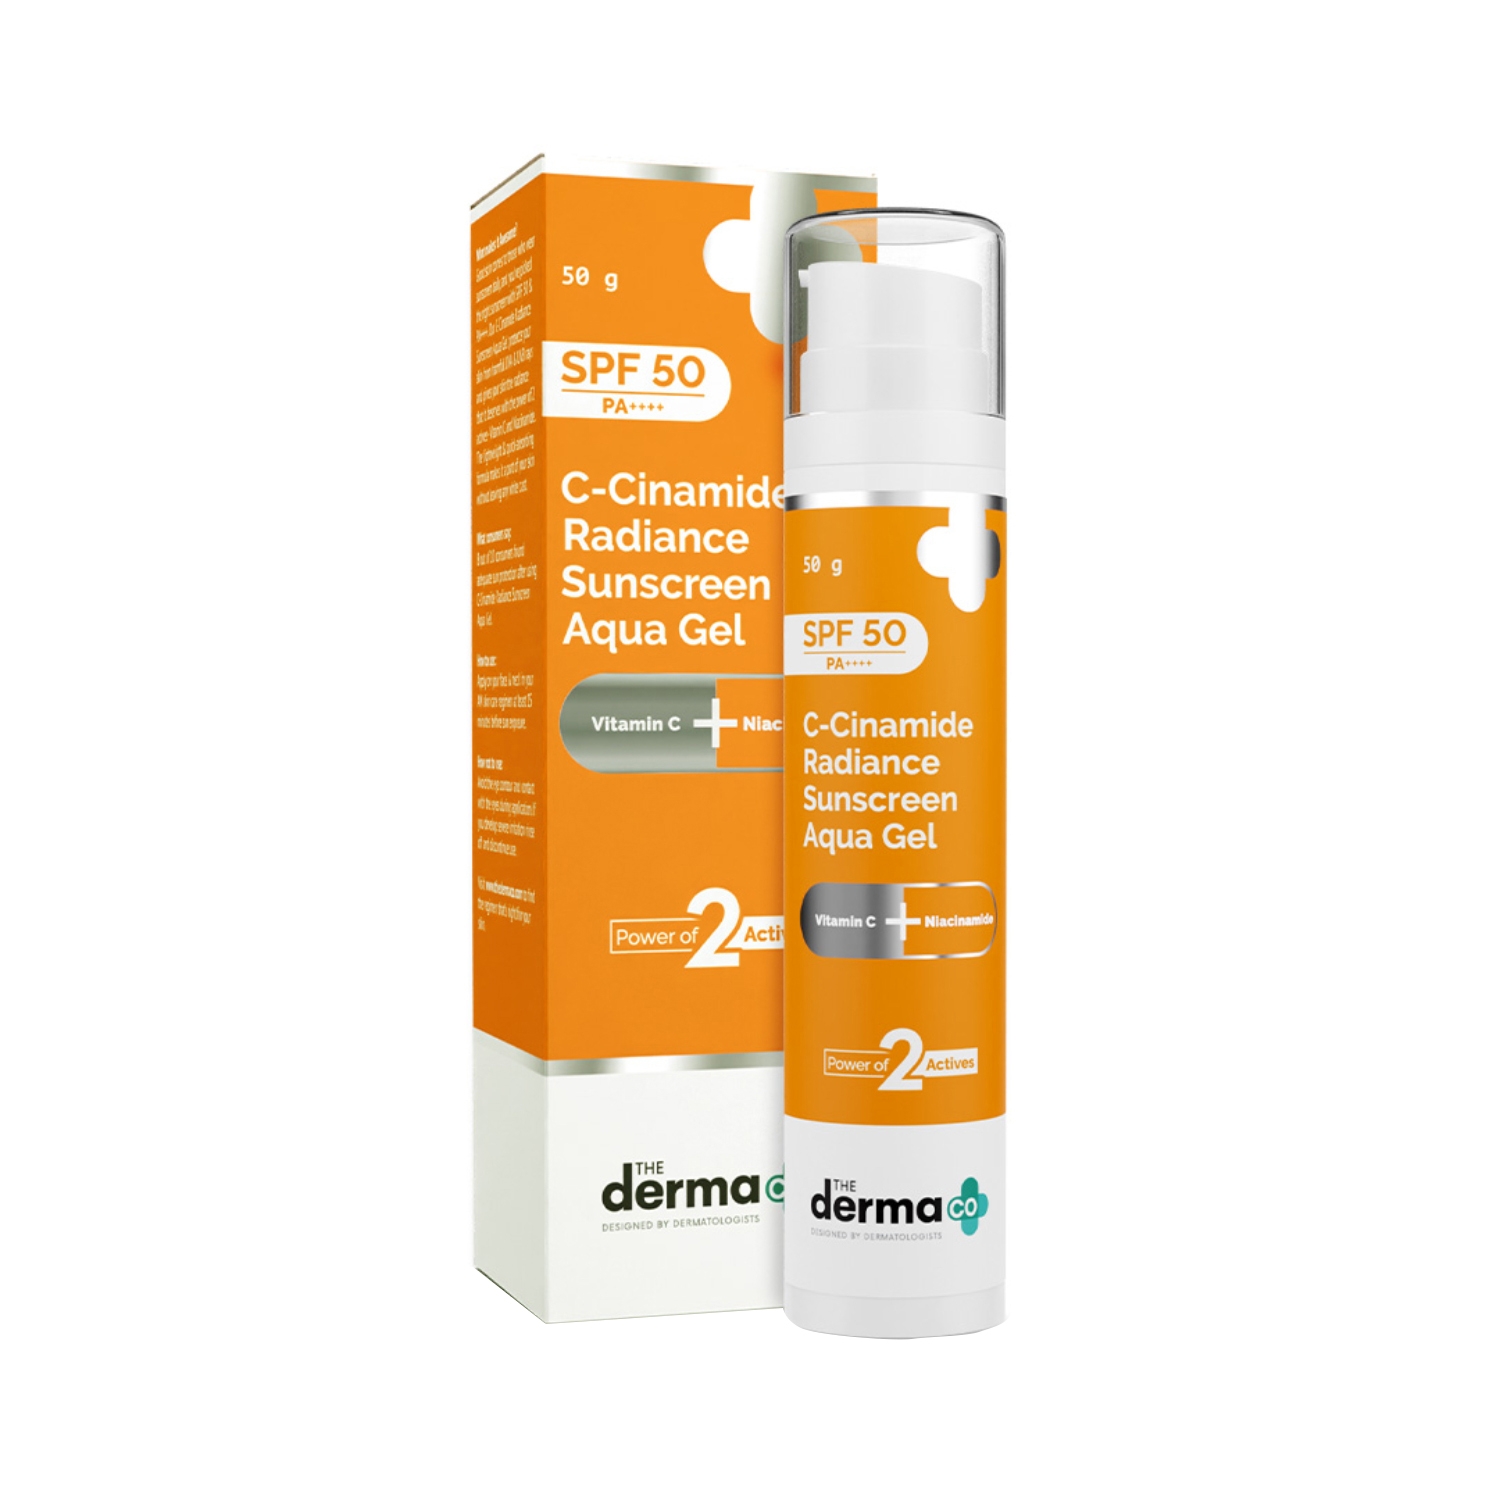 The Derma Co | The Derma Co C-Cinamide Radiance Sunscreen Aqua Gel With SPF 50 PA++ (50g)